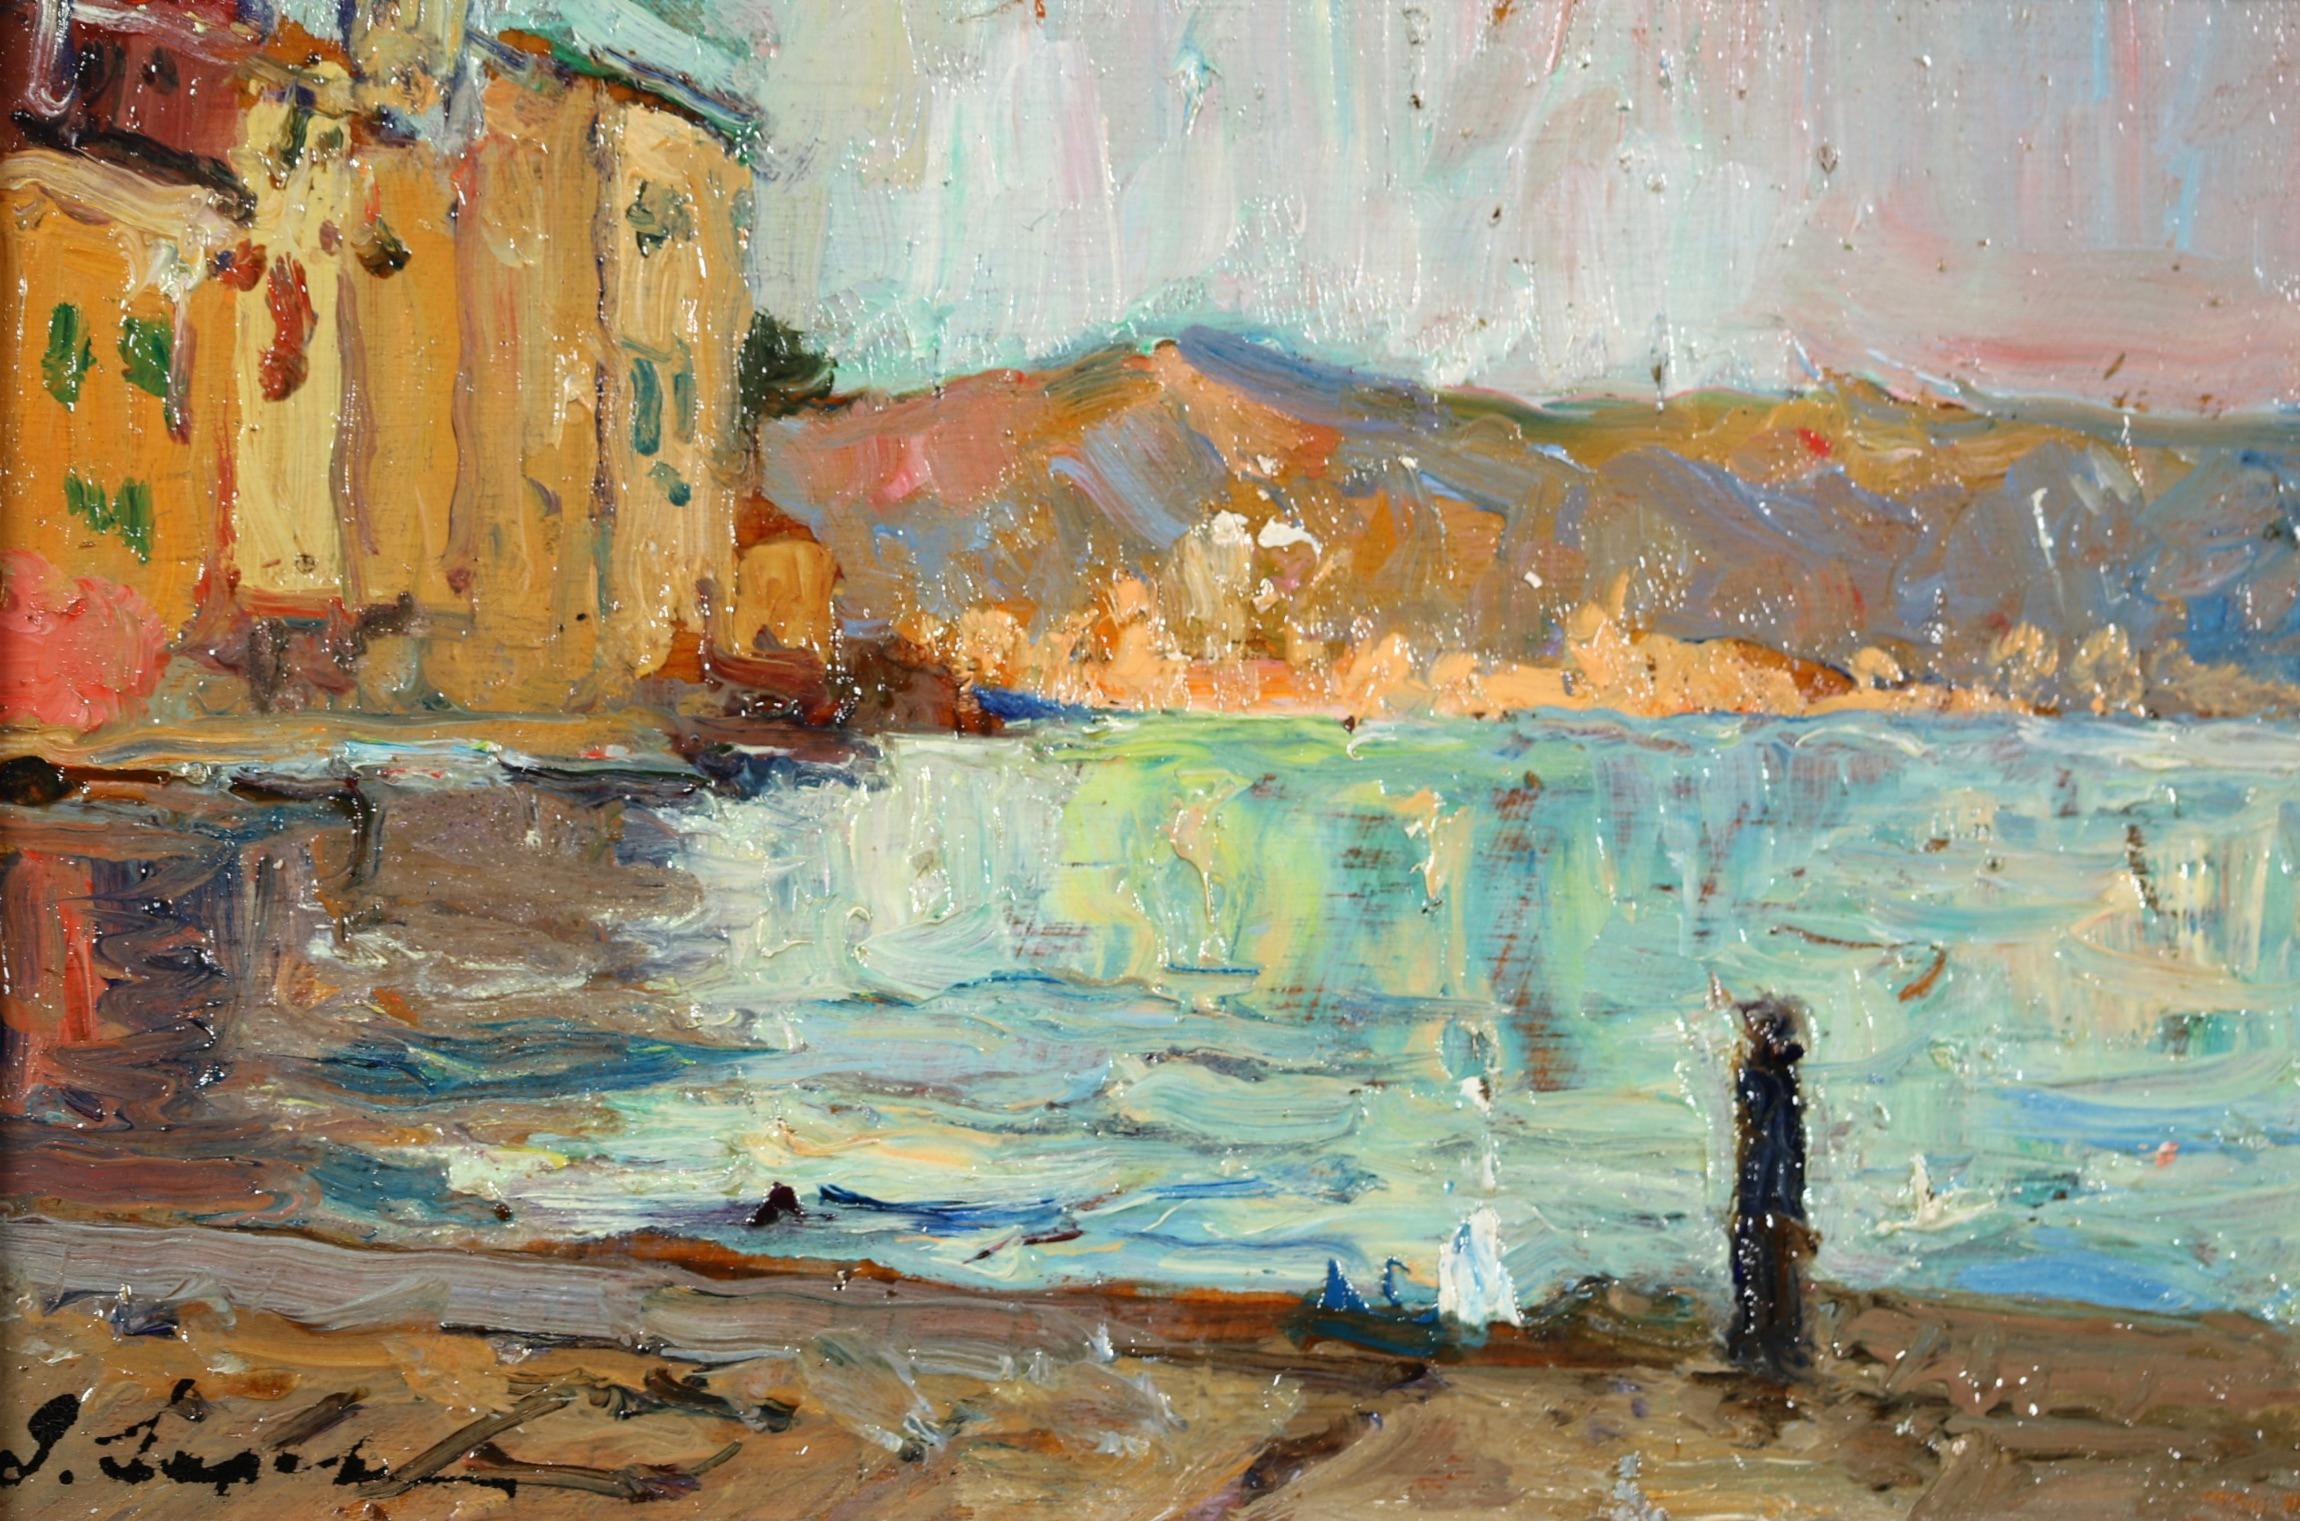 Signed oil on board landscape circa 1930 by Russian impressionist painter Georges Lapchin. The work depicts a view of the quai at Martigues in the South of France. To the left of the piece the tall buildings overlook the water. Beyond the water we